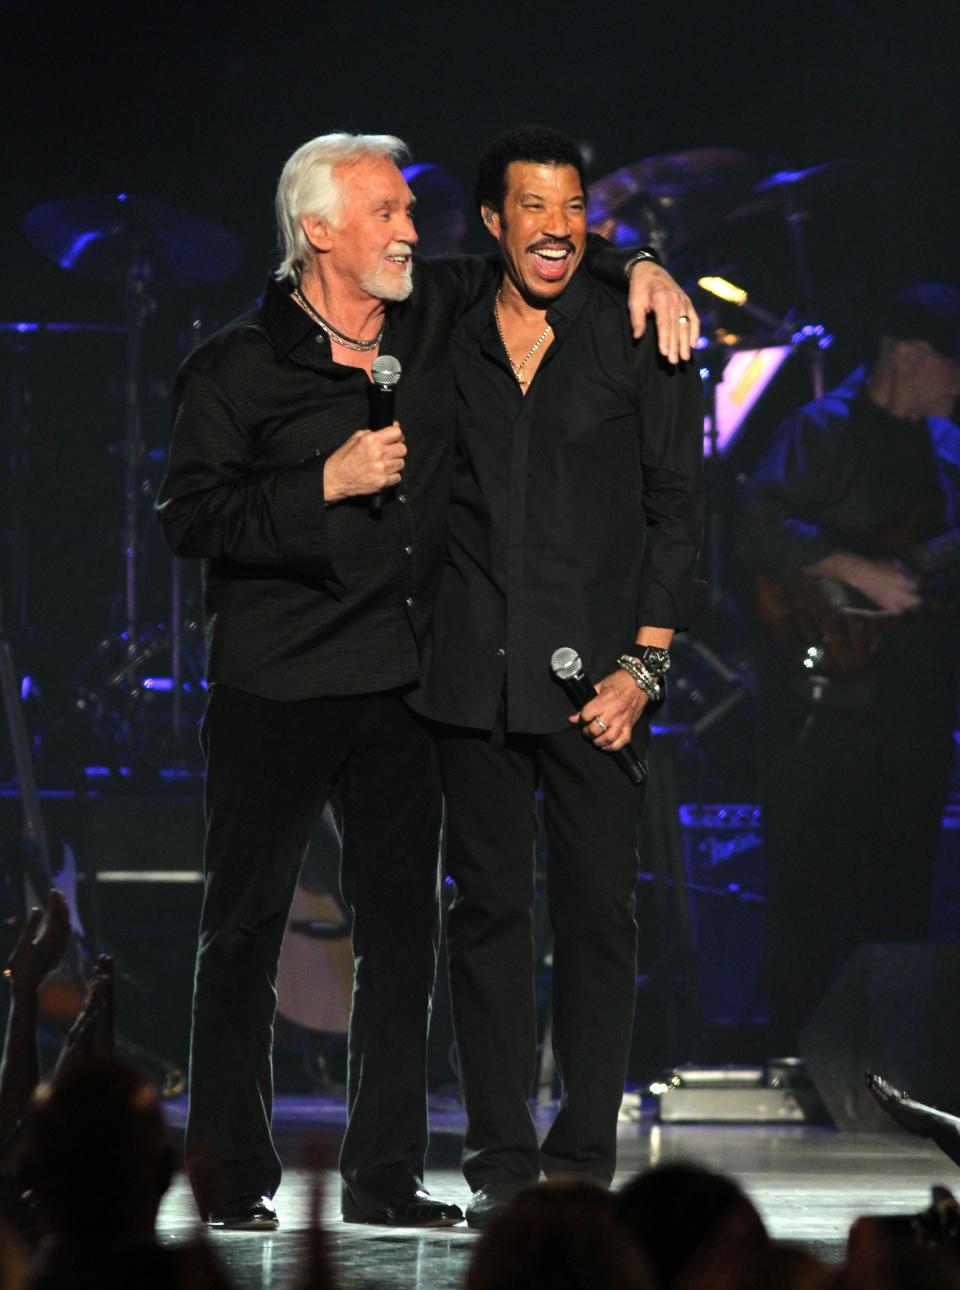 Kenny Rogers, left, and Lionel Richie perform "Lady" at ACM Presents: Lionel Richie and Friends in Concert on April 2, 2012.